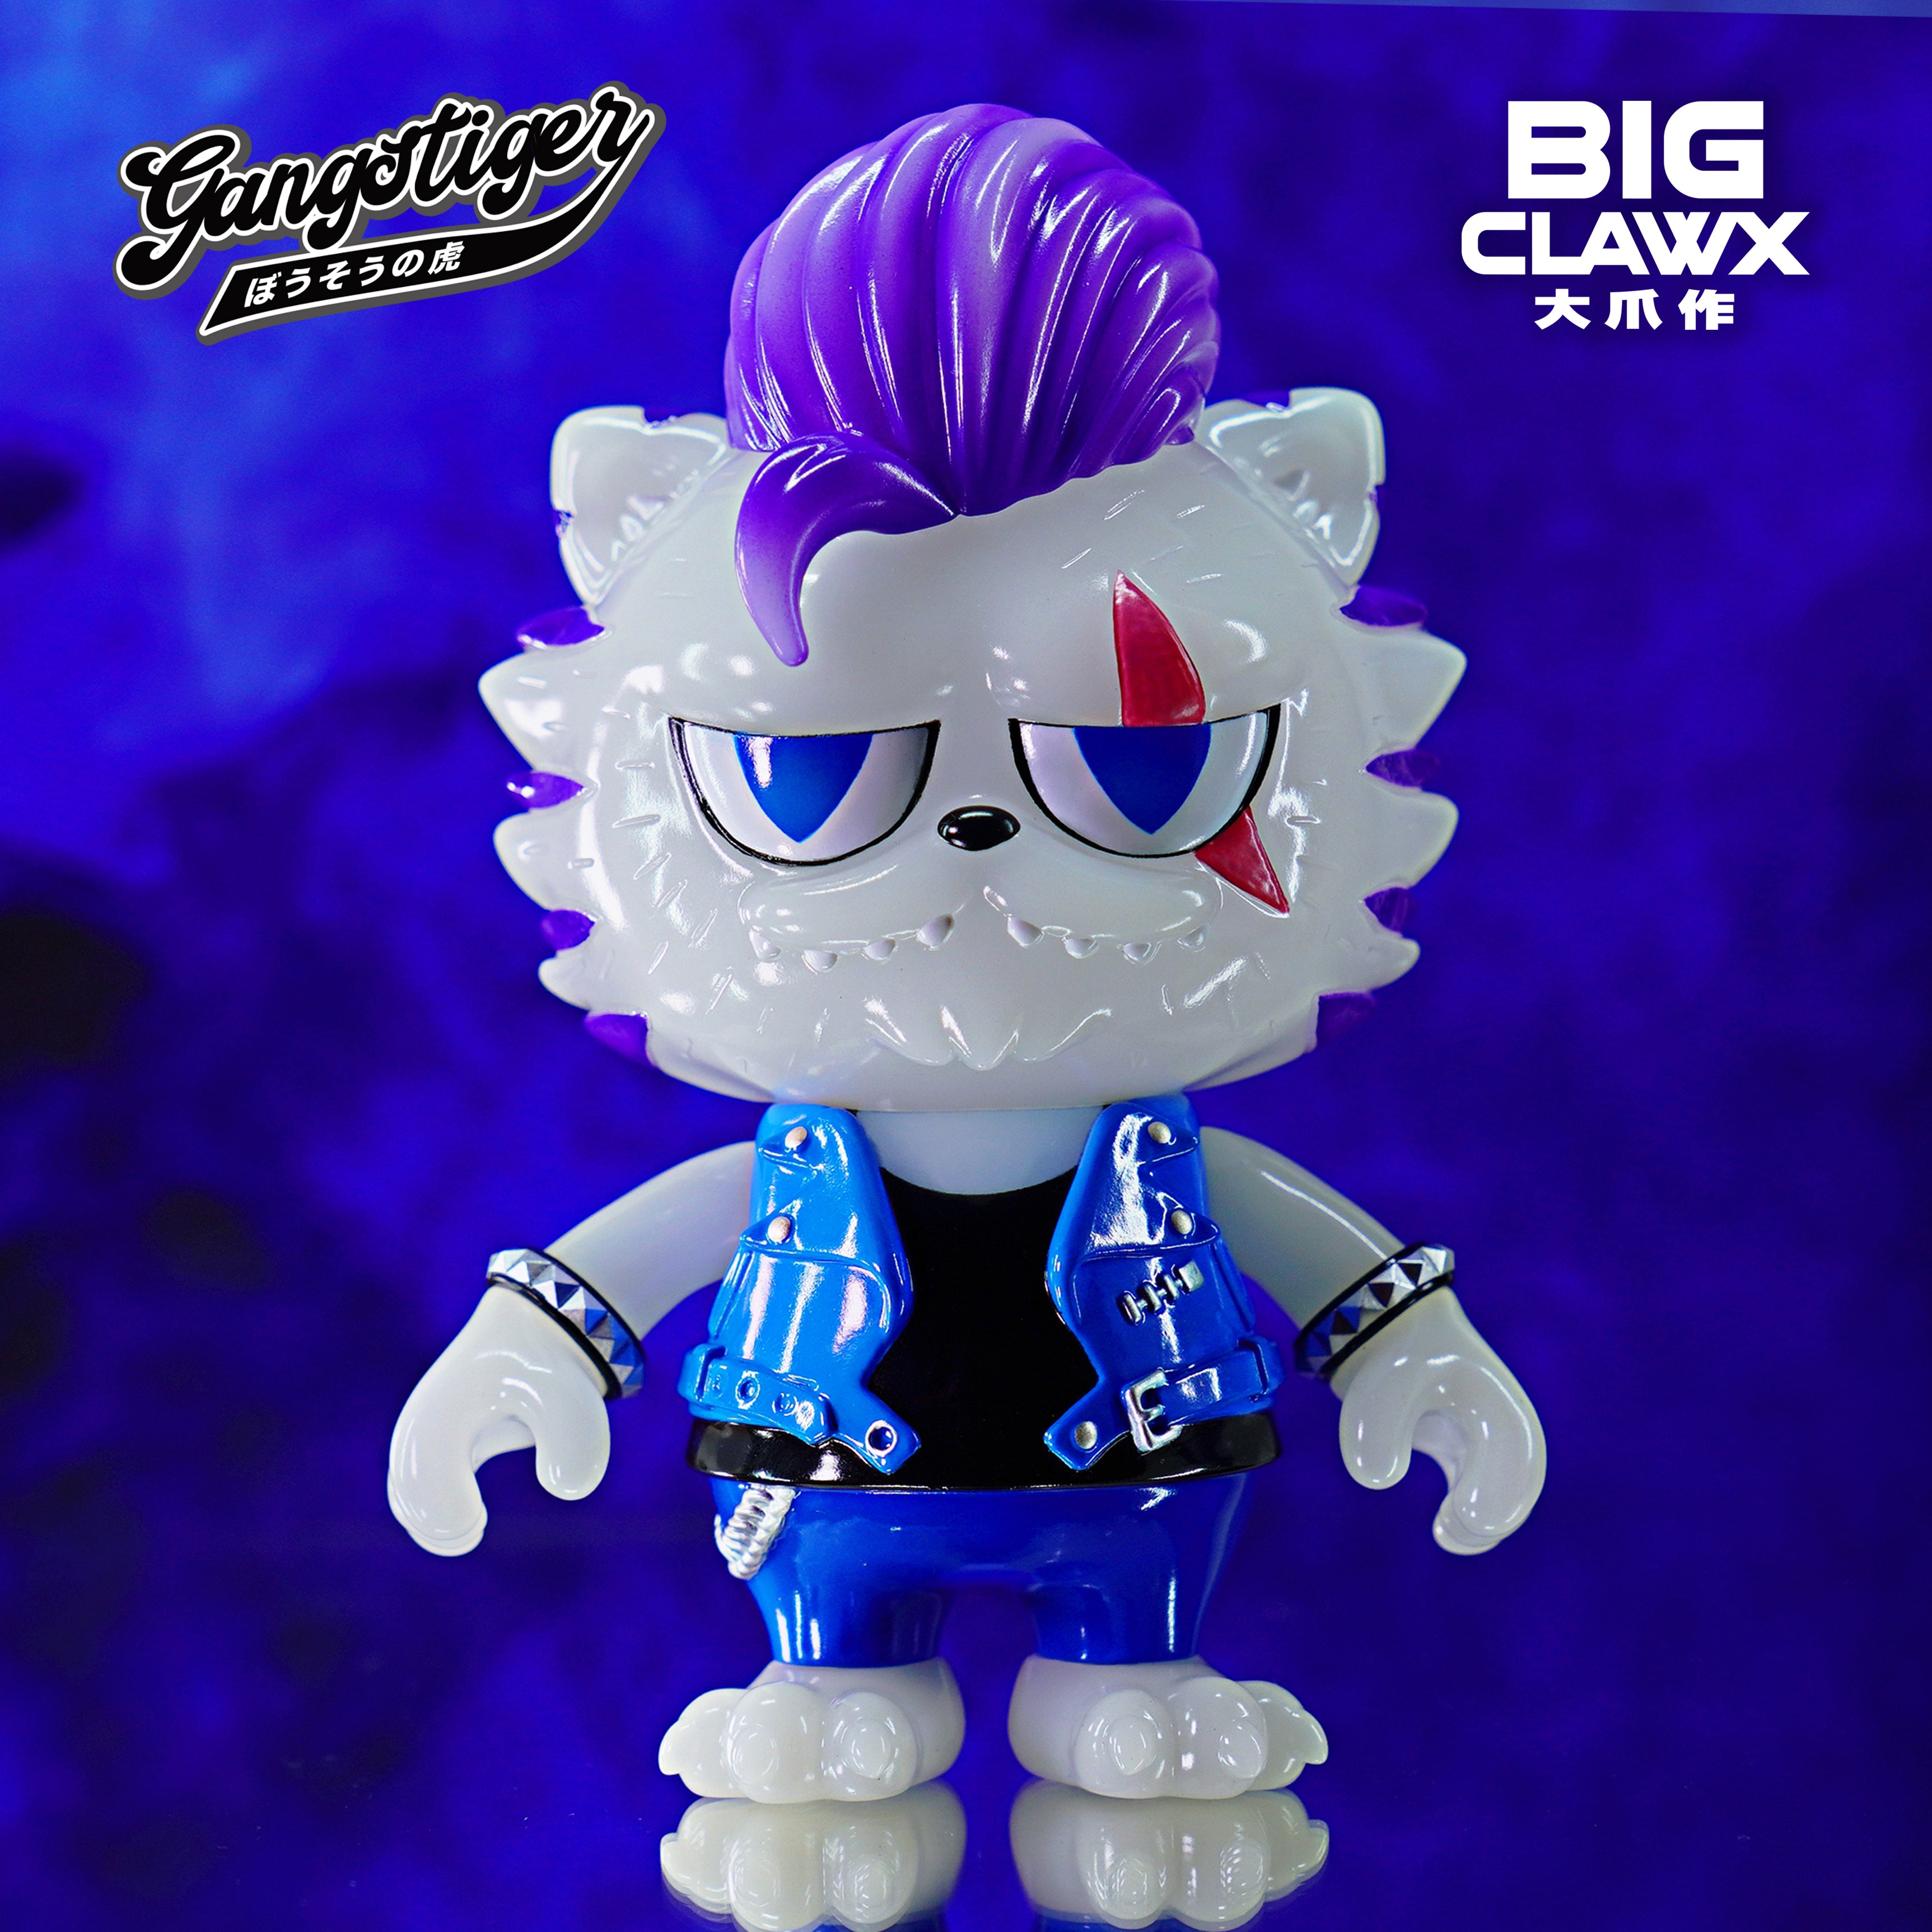 Gangstiger toy figurine with purple hair and blue object details, 15cm soft vinyl.